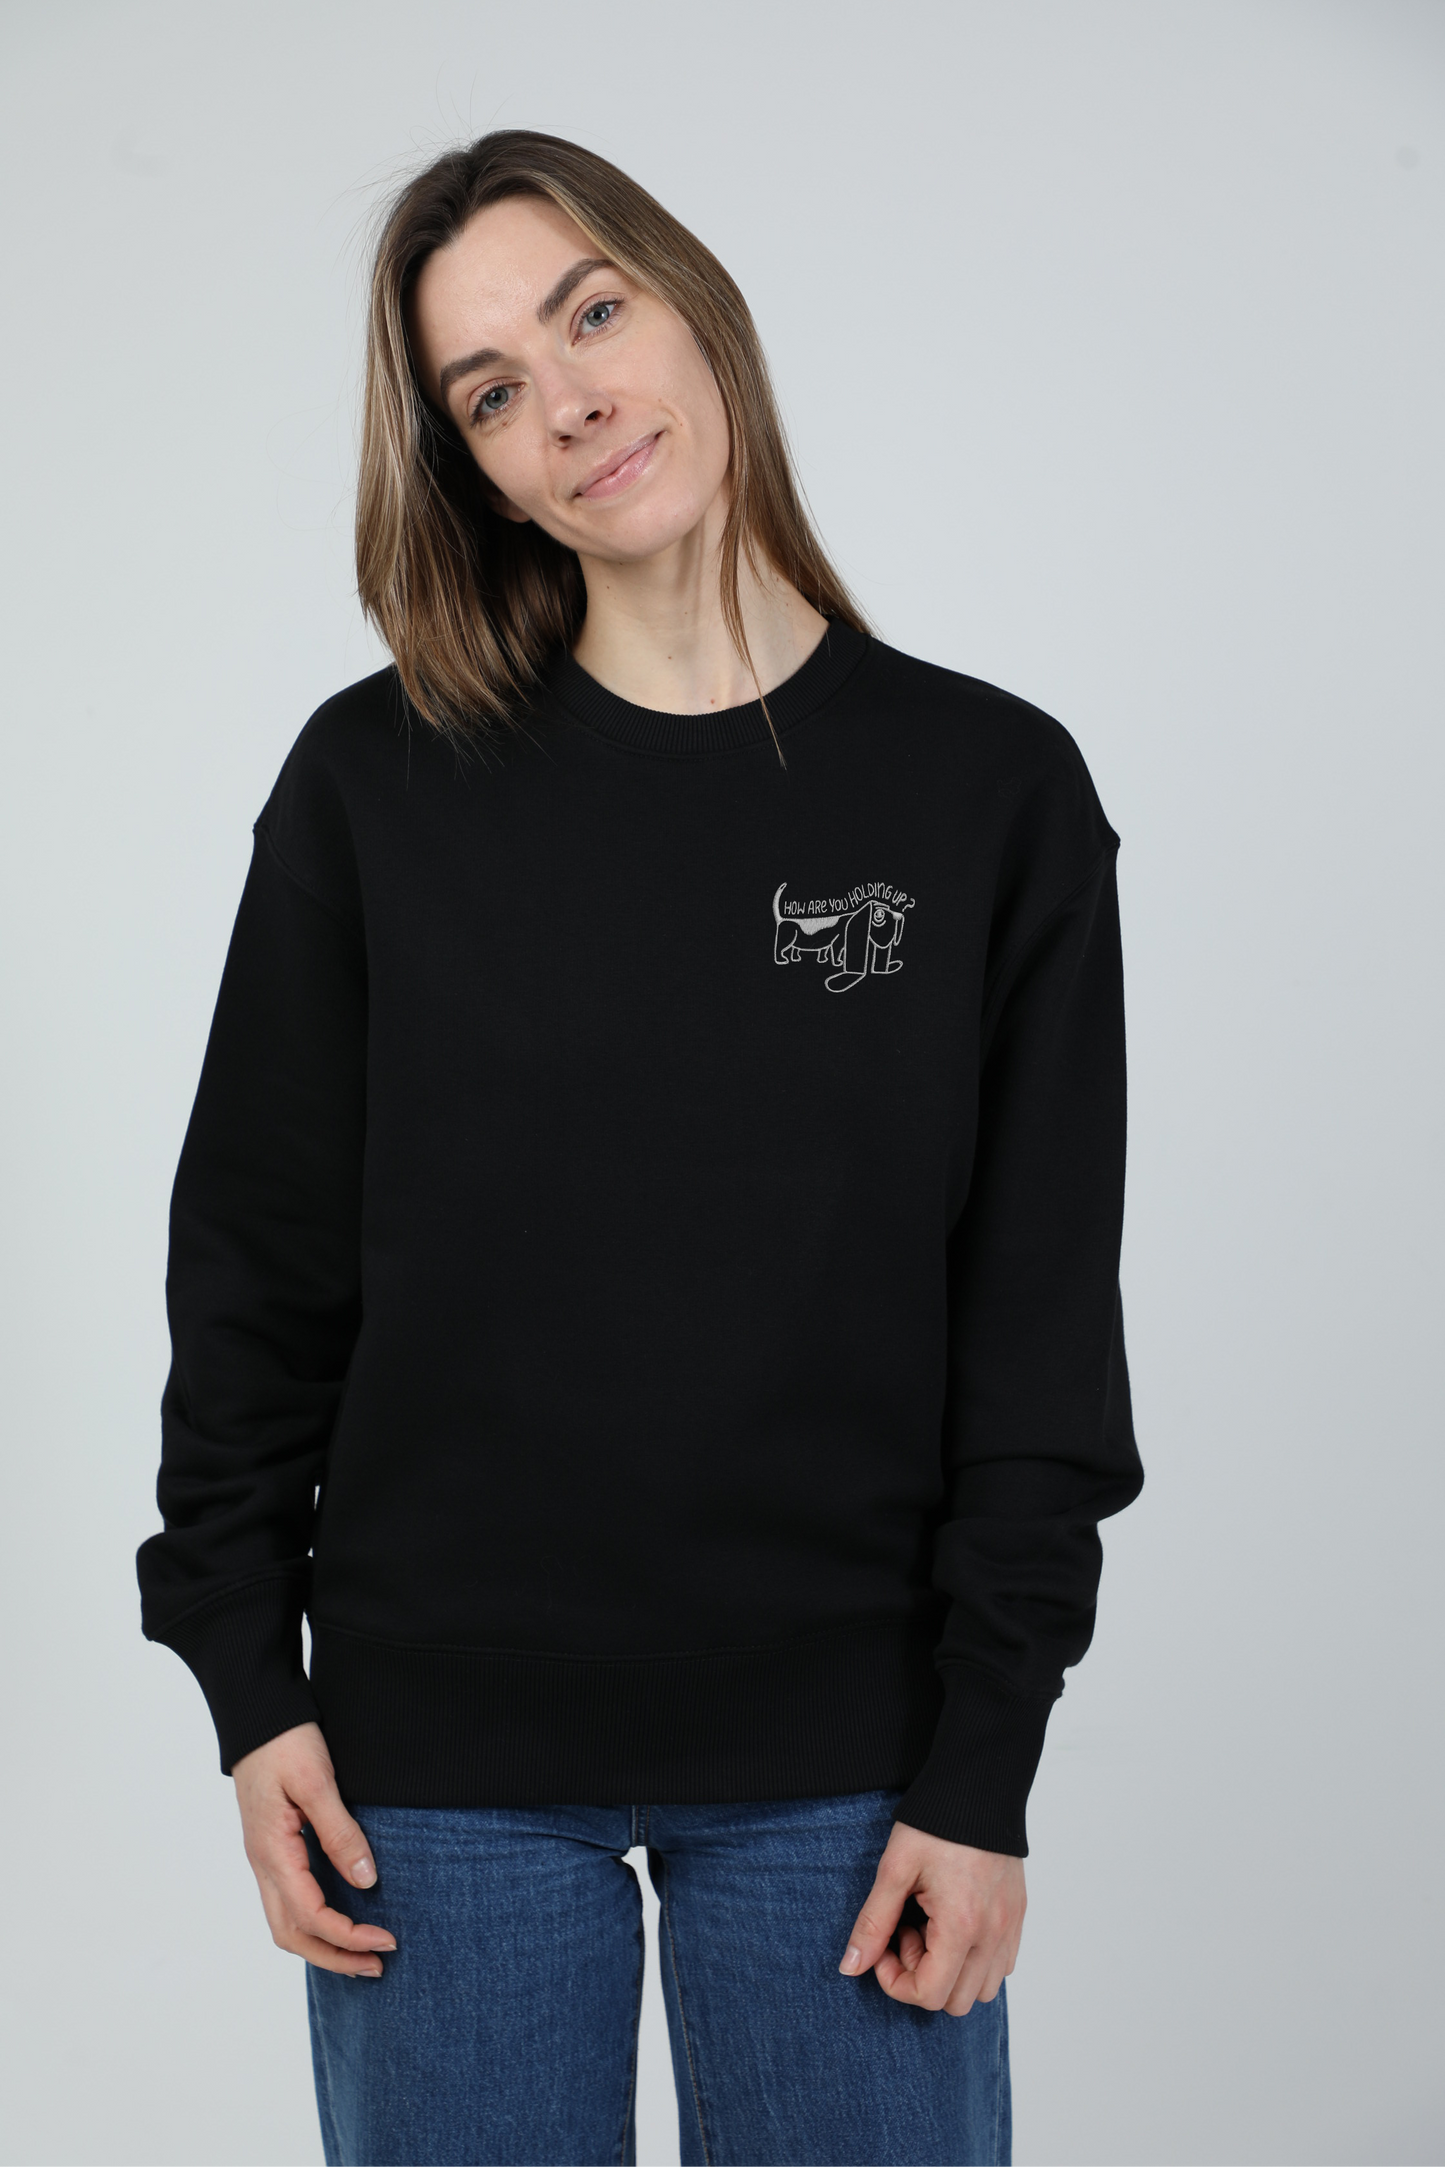 How are you holding up? | Crew neck sweatshirt with embroidered dog. Oversize fit | Unisex